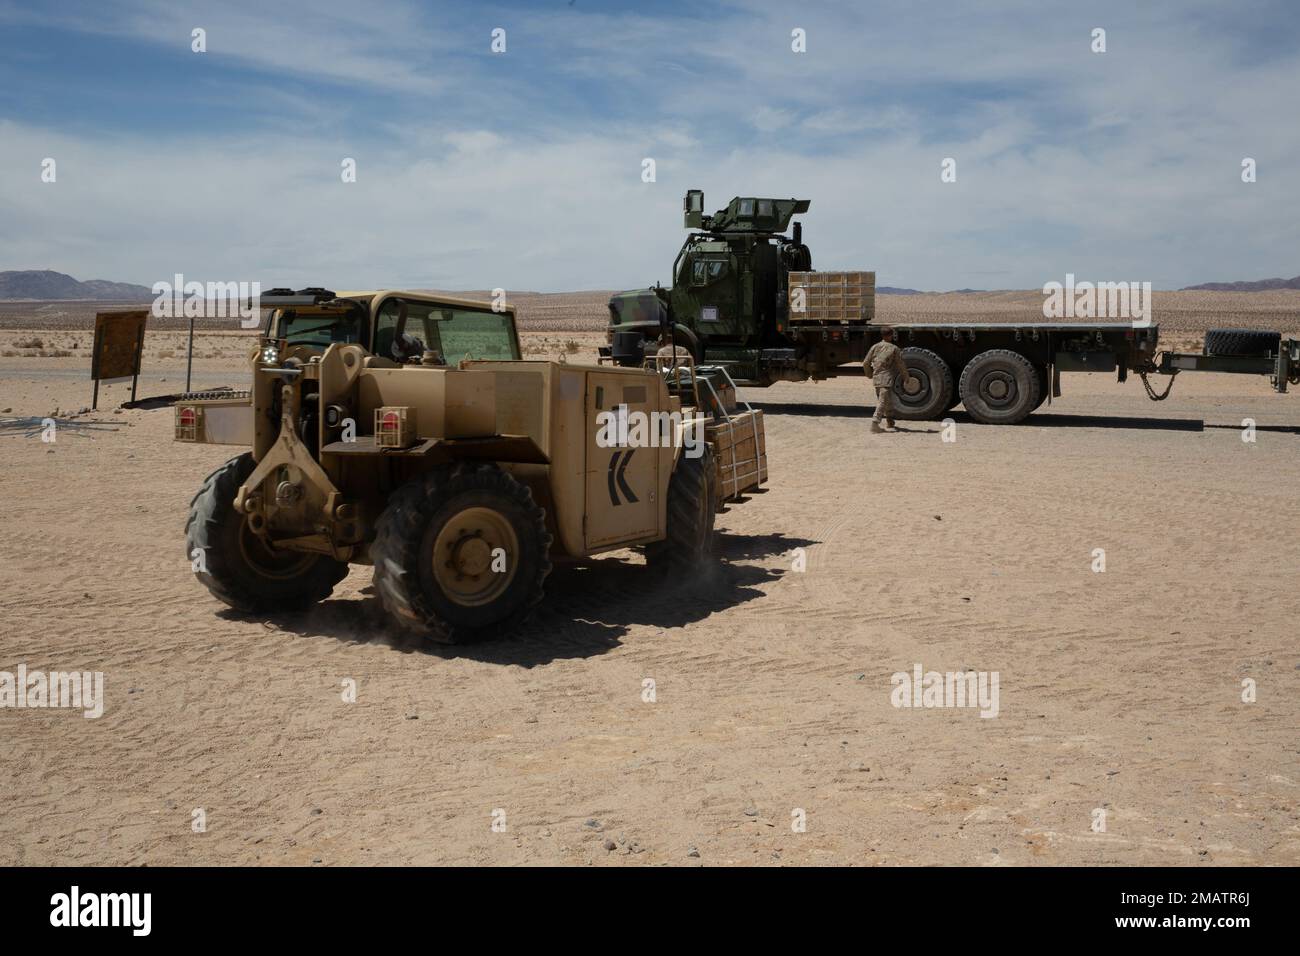 U.S. Marines with Combat Logistics Battalion 13, 13th Marine Expeditionary Unit, load ammunition onto a Medium Tactical Vehicle Replacement utilizing a Rough Terrain Forklift during Realistic Urban Training exercise at Marine Corp Air Ground Combat Center Twentynine Palms on June 4, 2022. The 13th MEU is currently conducting RUT exercise to enhance the integration and collective capability of the MEU’s command, air, ground, and logistics elements and prepare the 13th MEU to meet the nation’s crisis response needs during their upcoming overseas deployment. Stock Photo